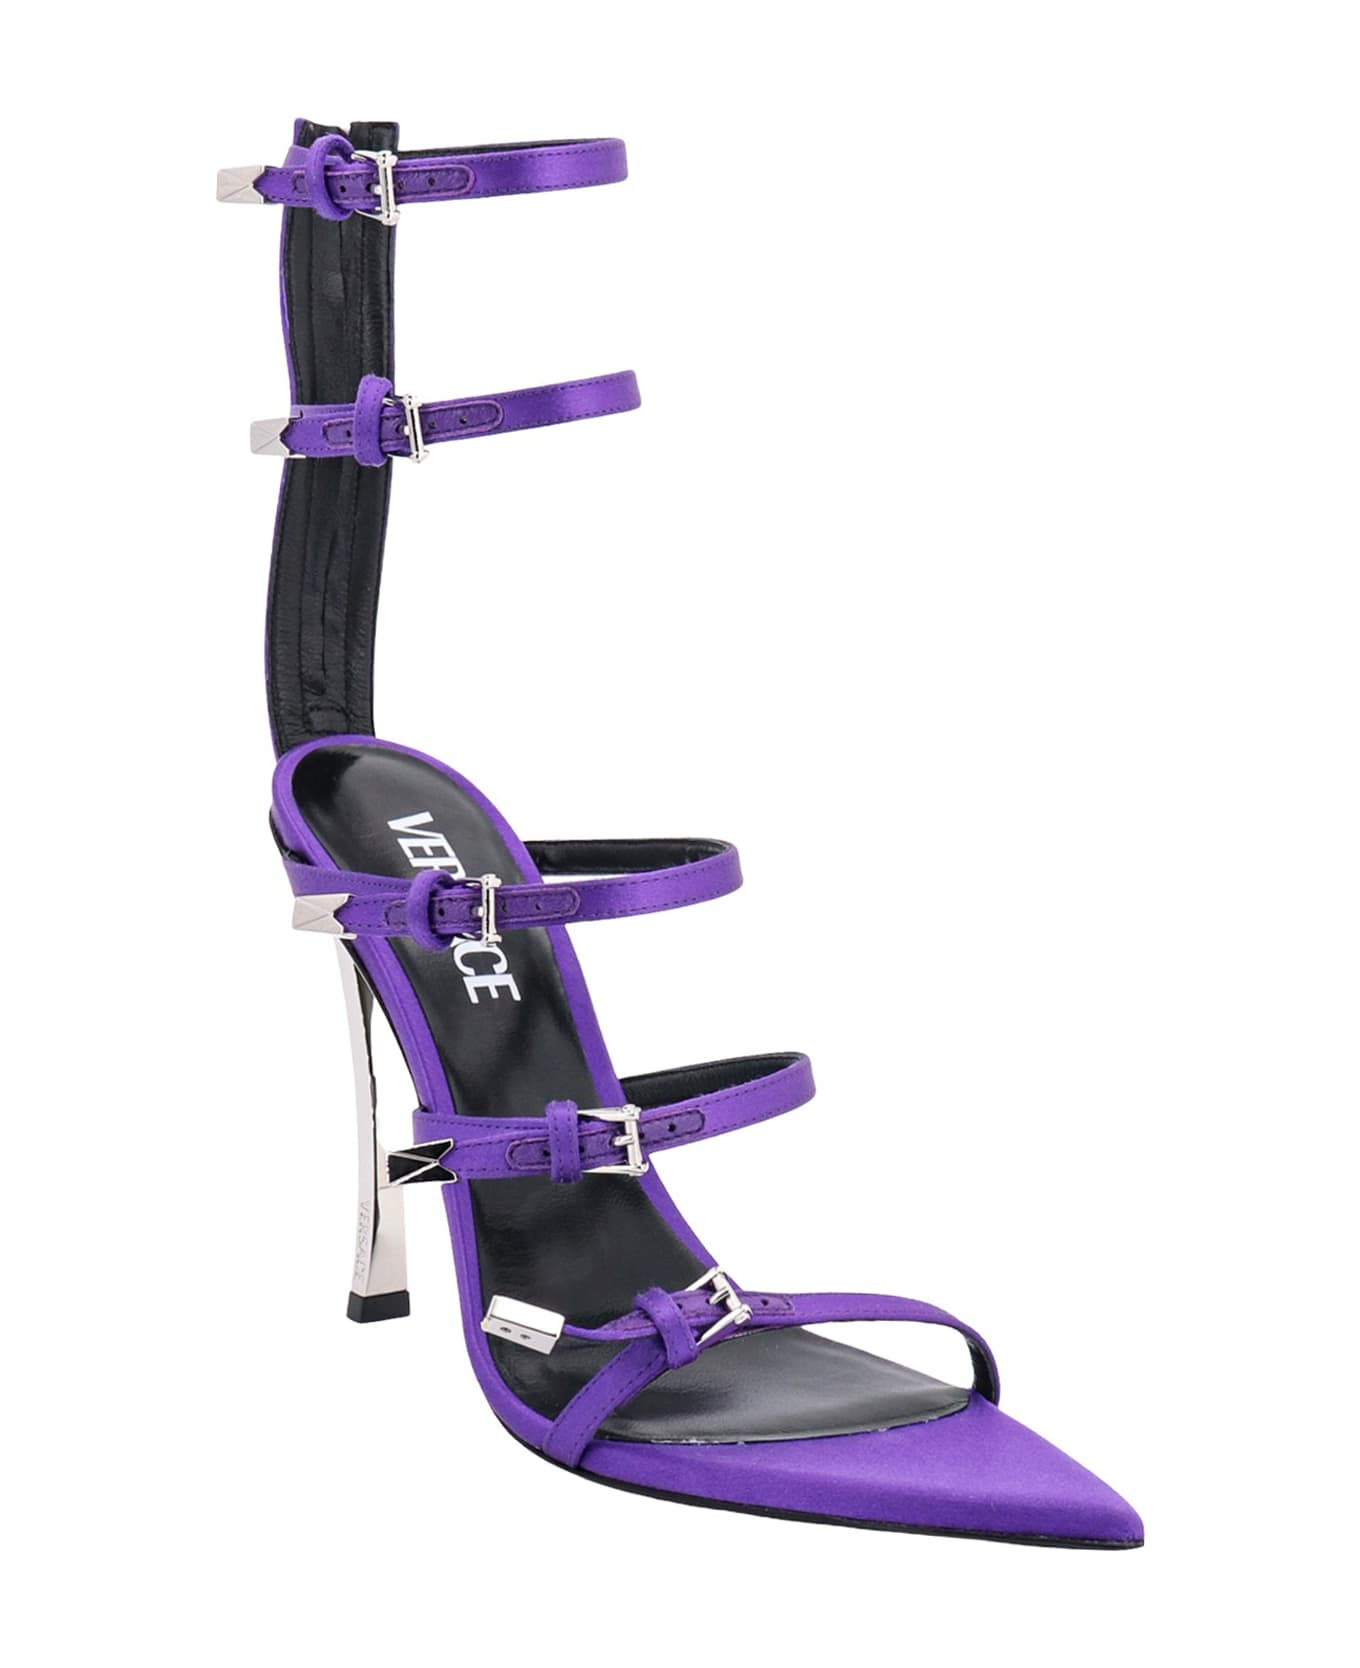 Versace Pin-point Sandals With Straps In Violet Leather Woman - Purple サンダル